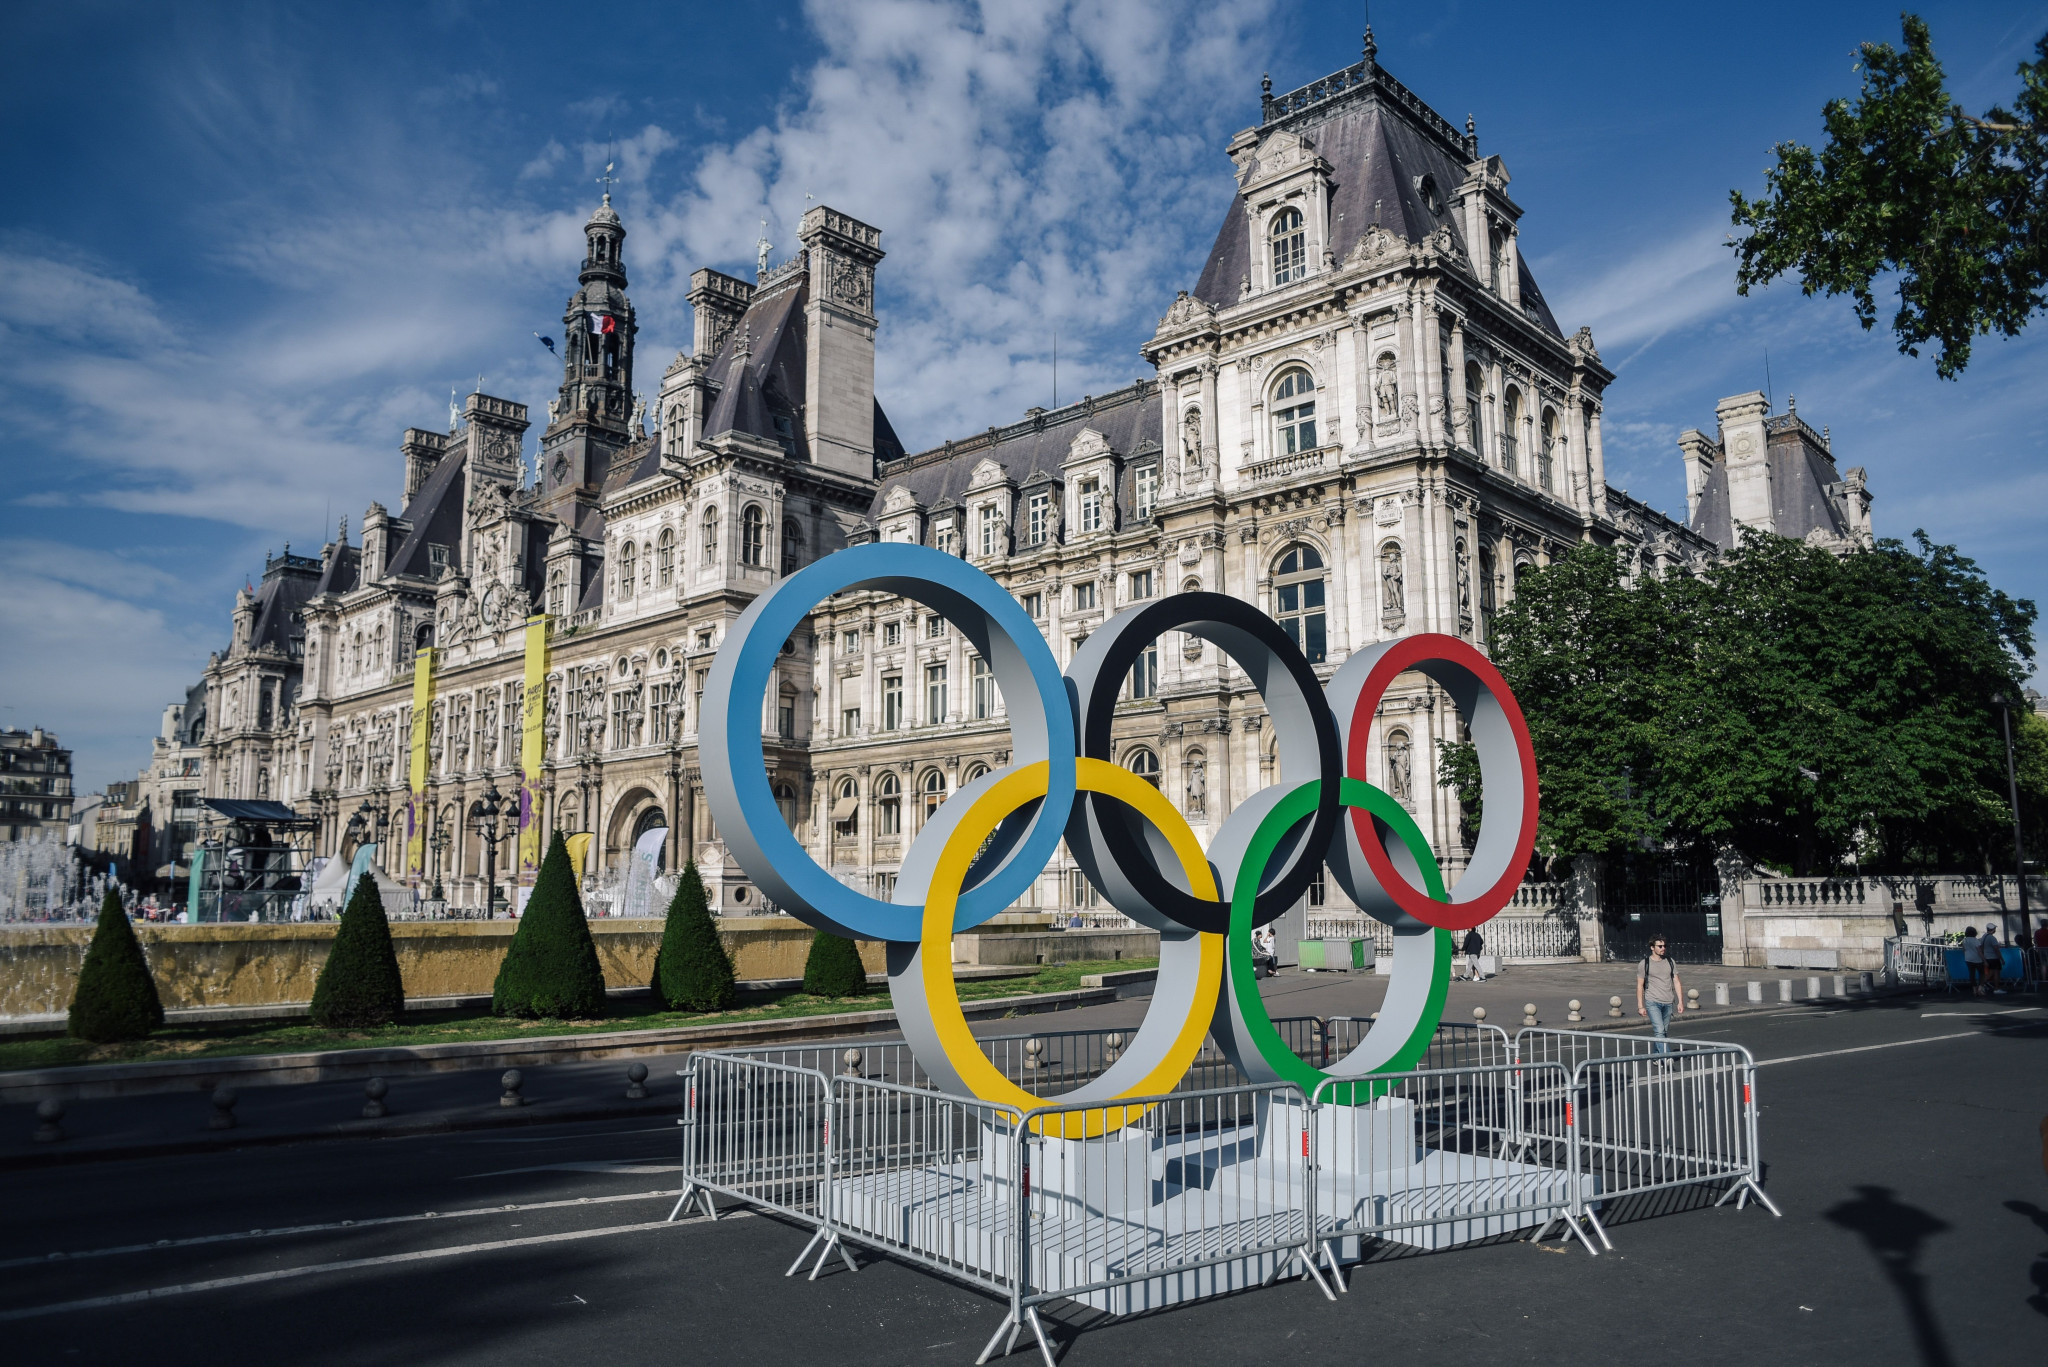 CNOSF dispute continues to cast shadow over Paris 2024 preparations as call for governing body to respect ethics and transparency